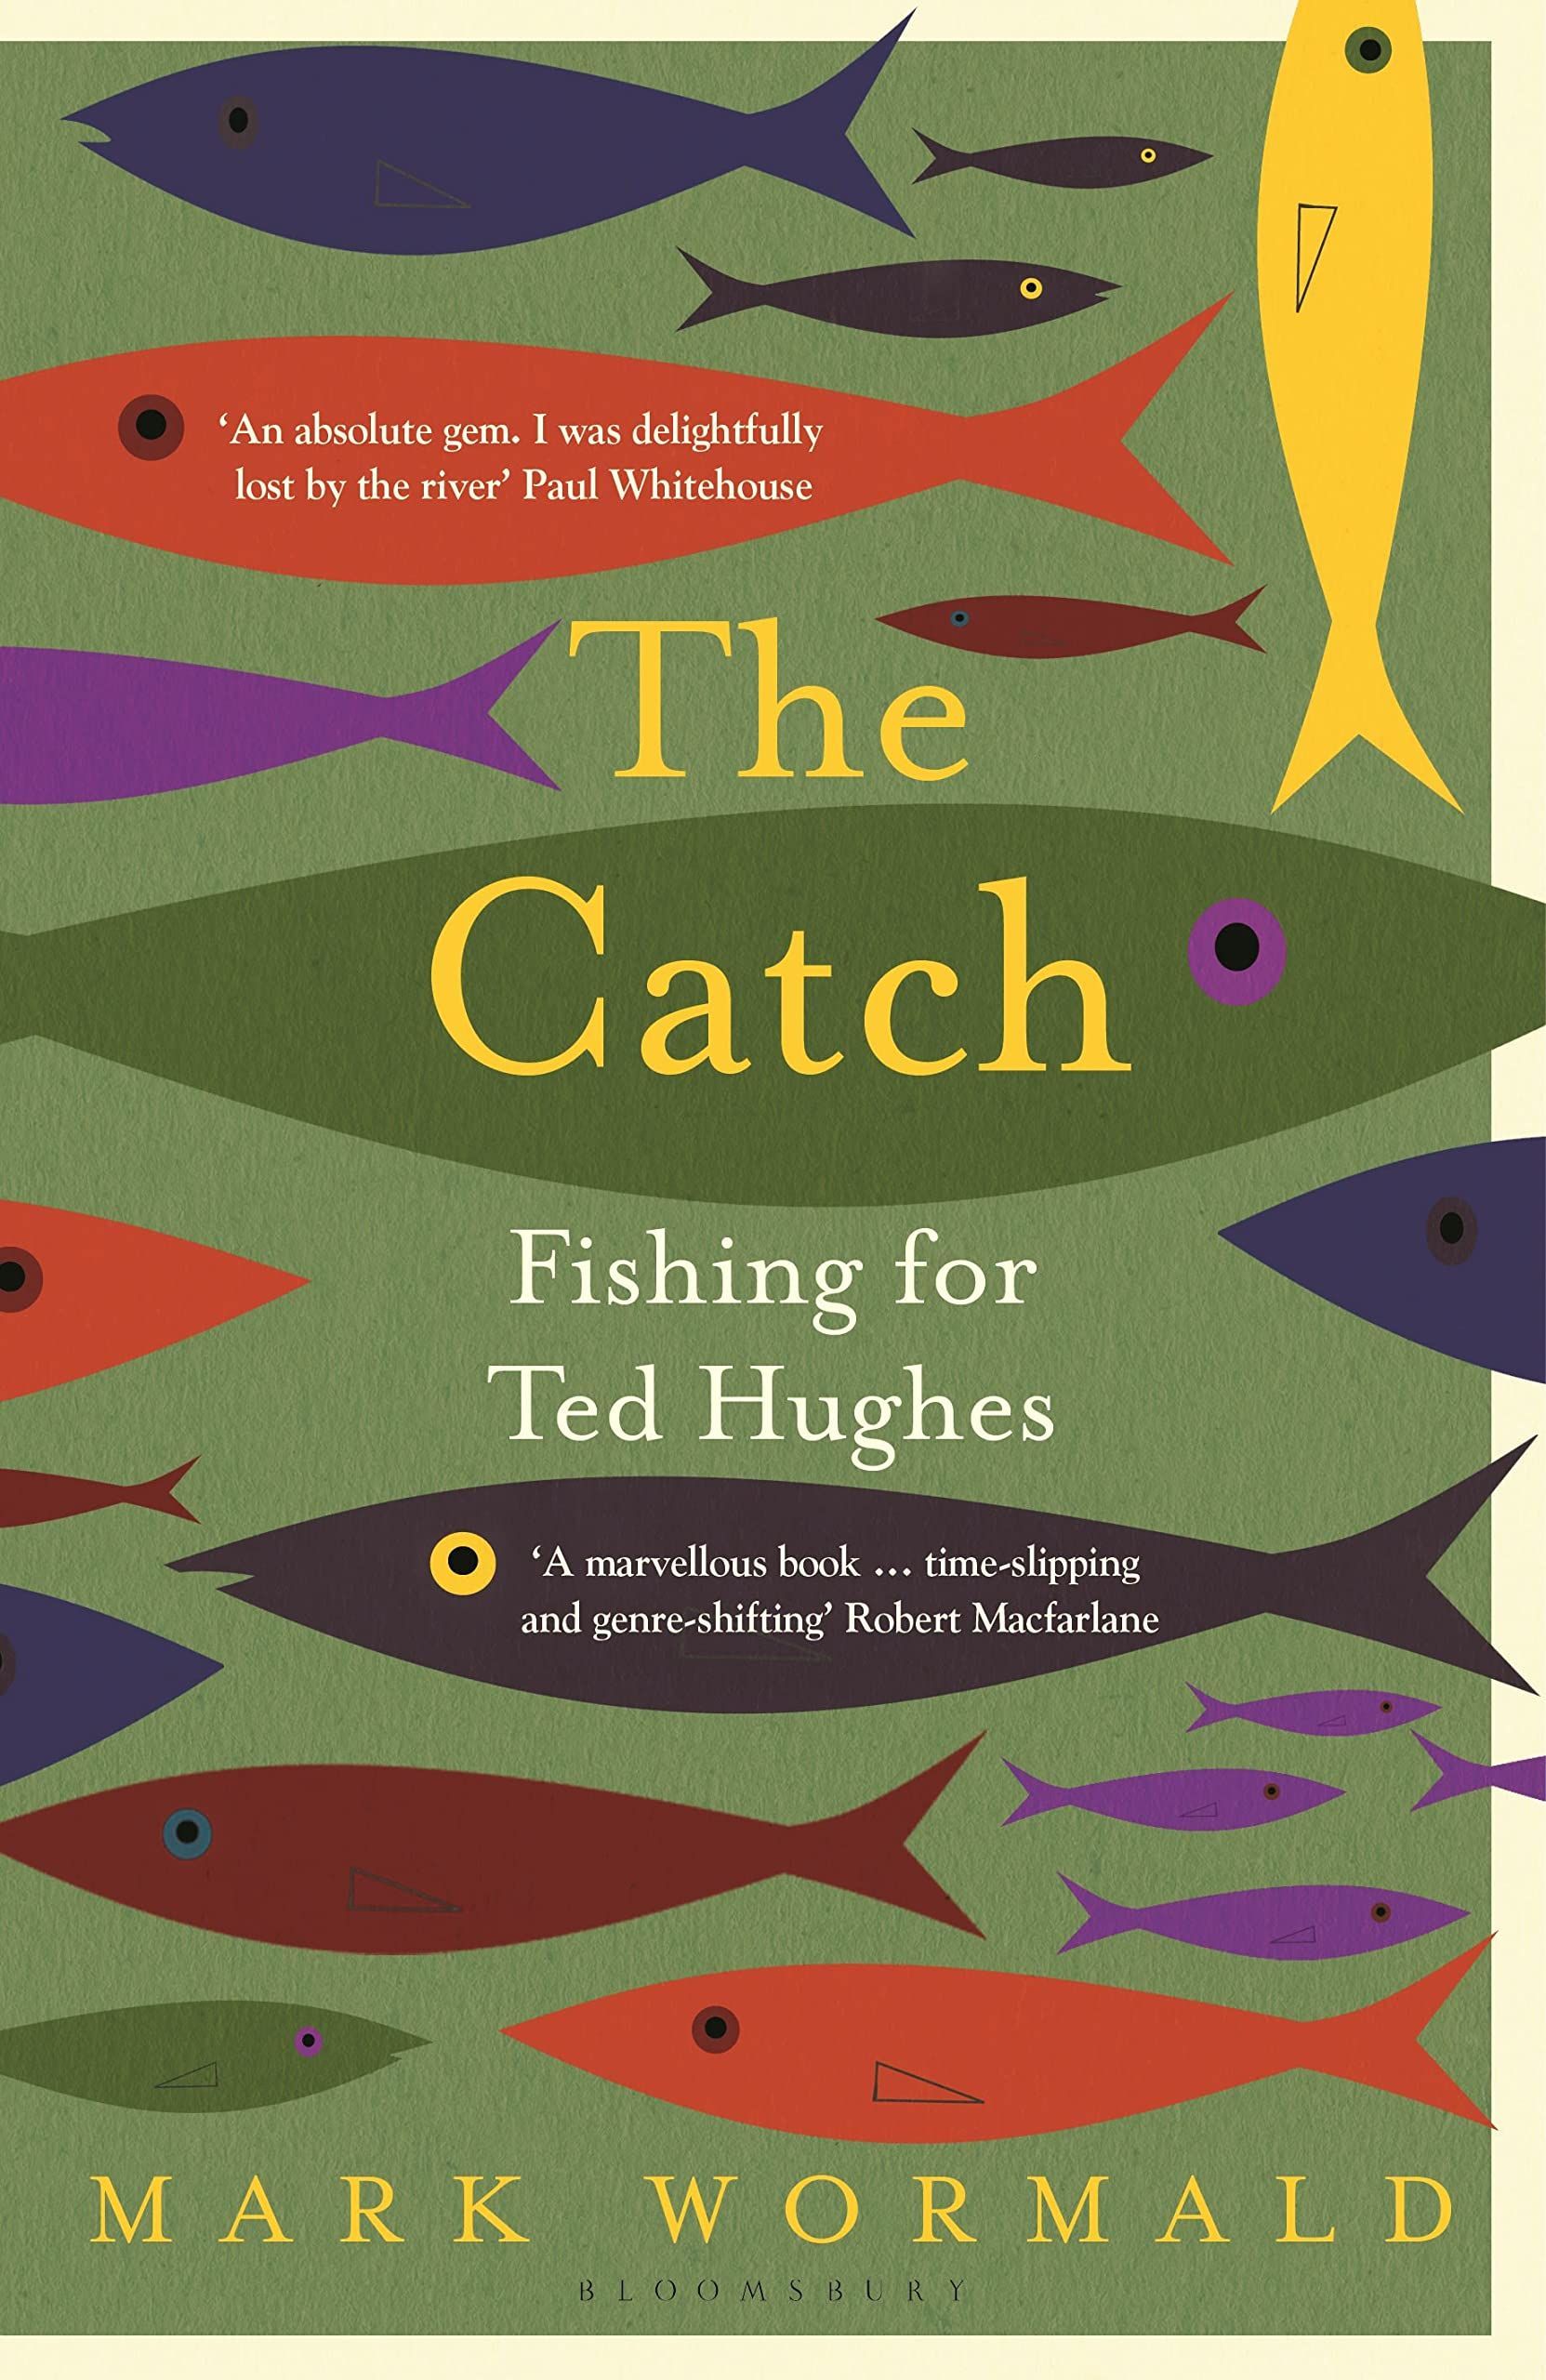 Away Upstream Again: On Mark Wormald’s “The Catch”